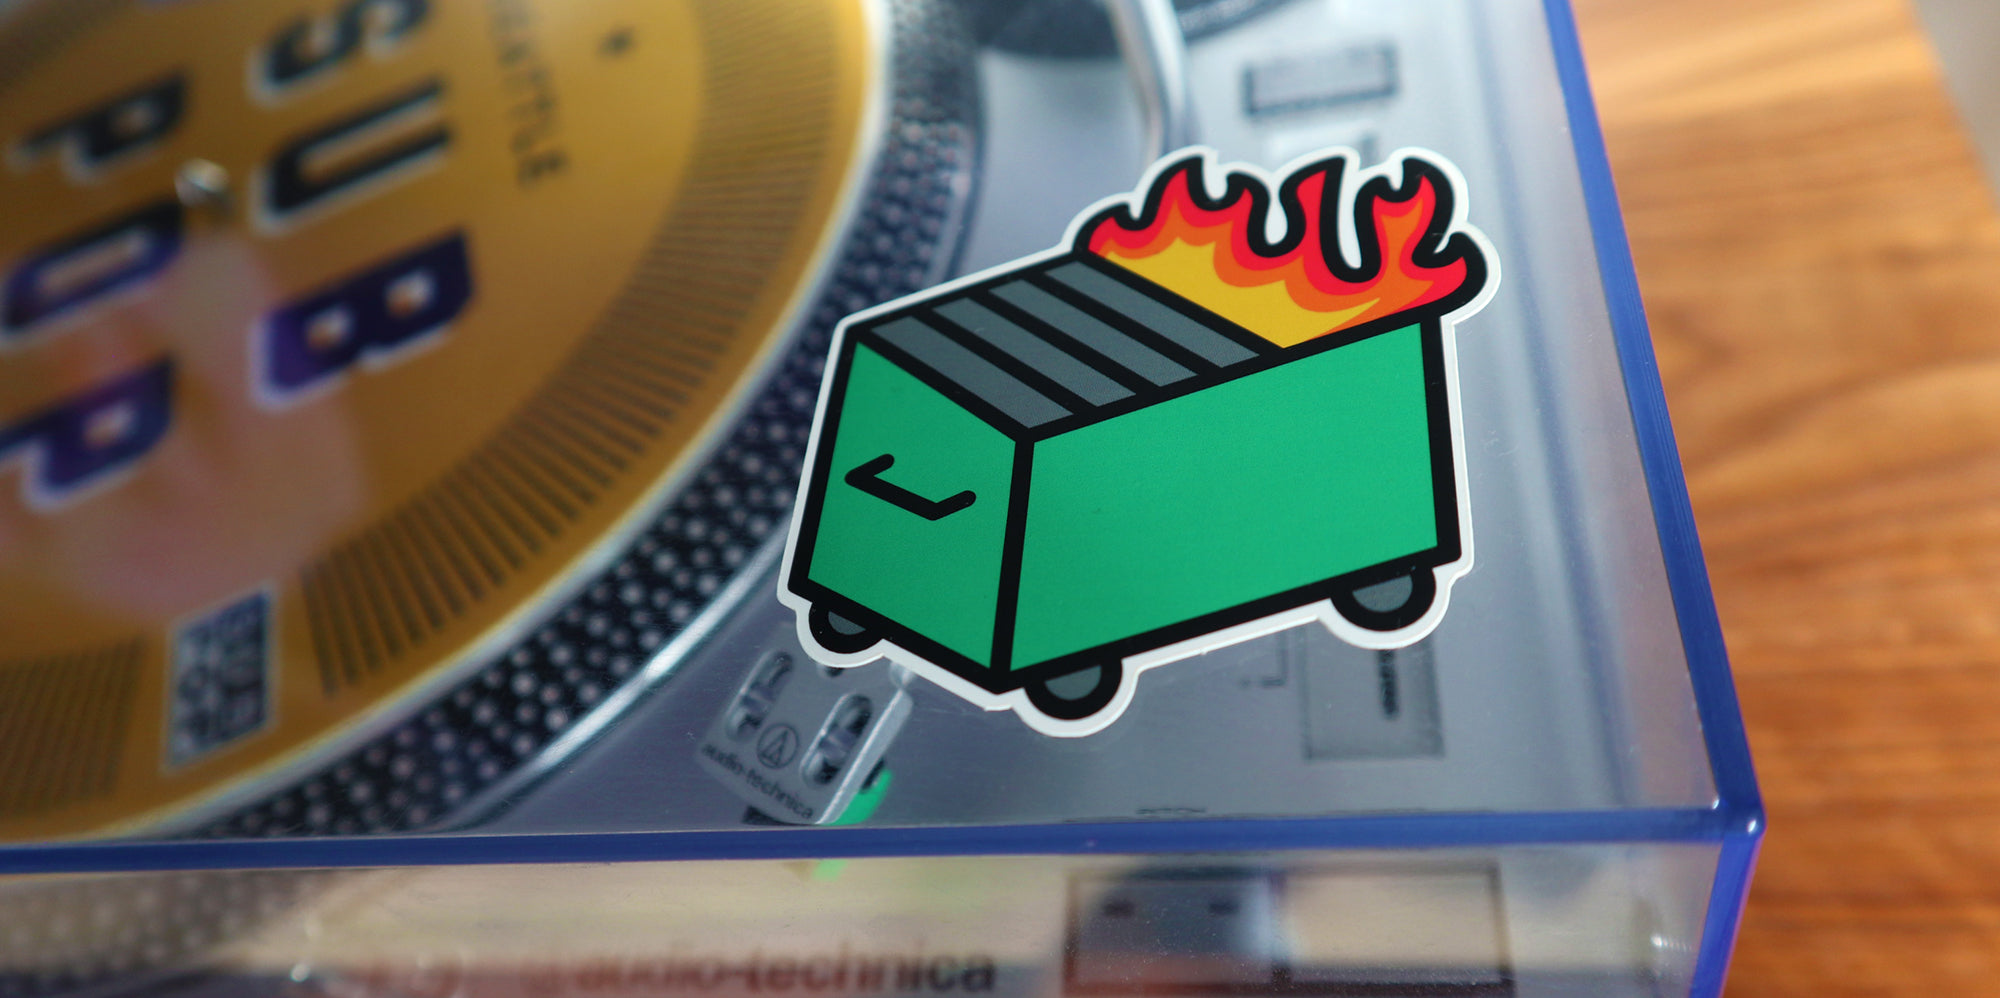 A dumpster fire stuck to the dust cover of a turntable